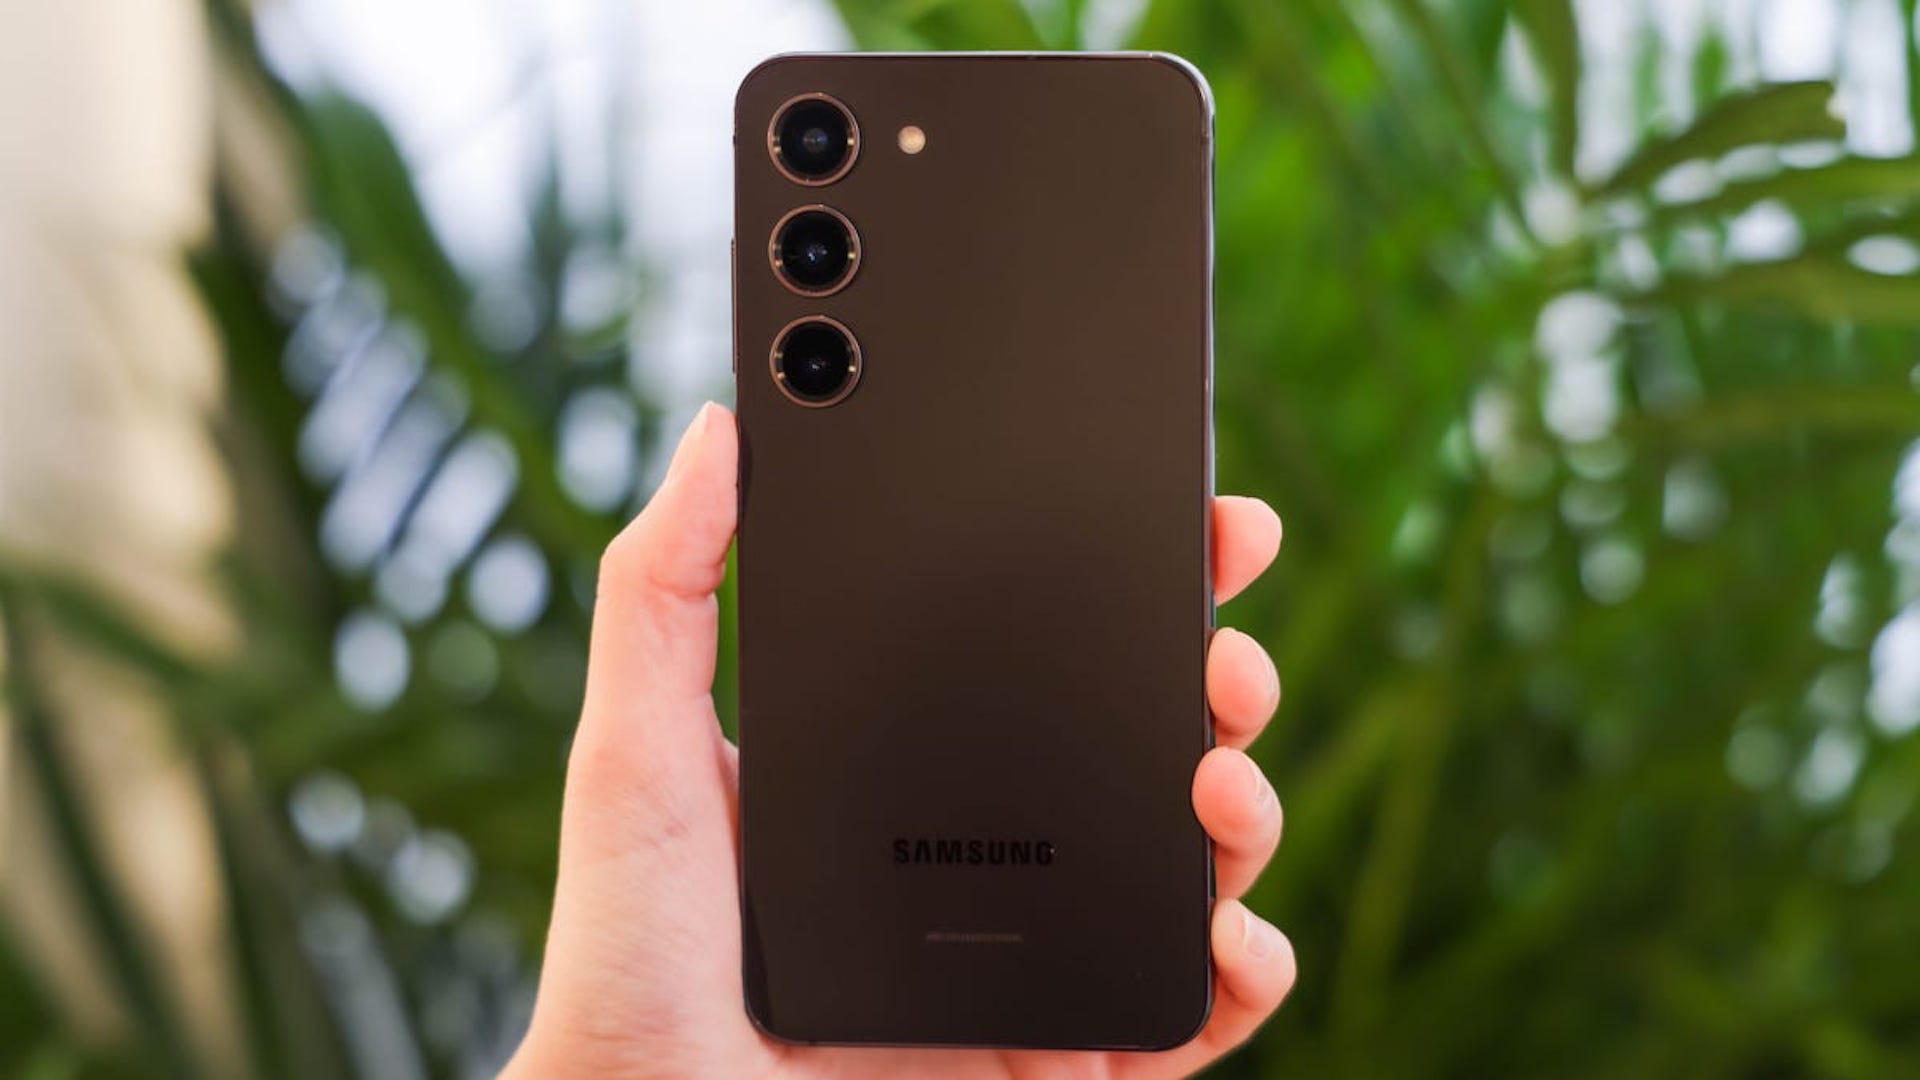 All of the new S23 models are very similar to last year's S22 smartphones.